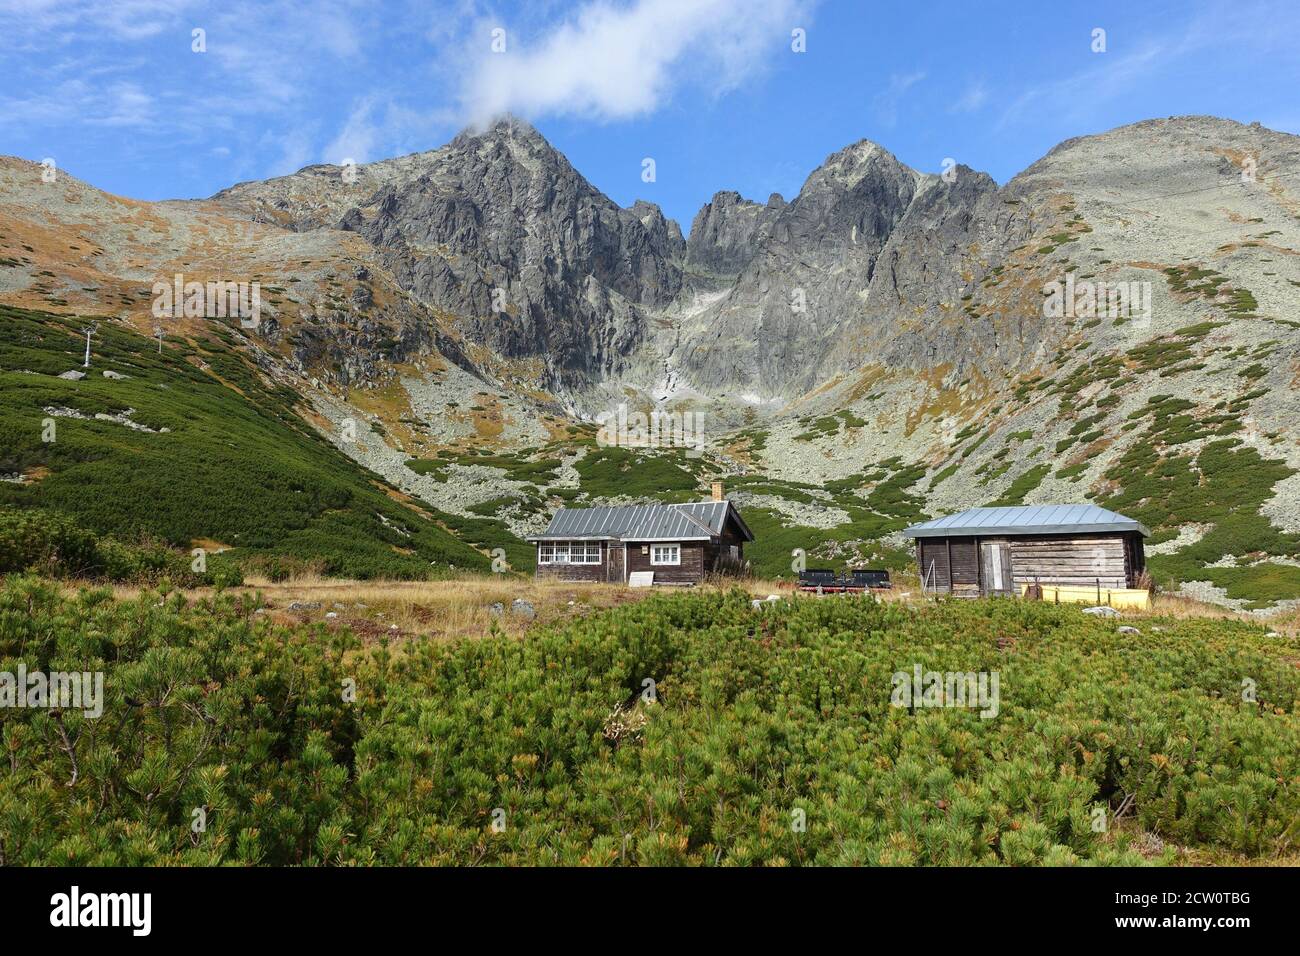 Lomnicky Stit with blue sky, observatory hidden behind clouds, High Tatras wallpaper, Slovakia Stock Photo